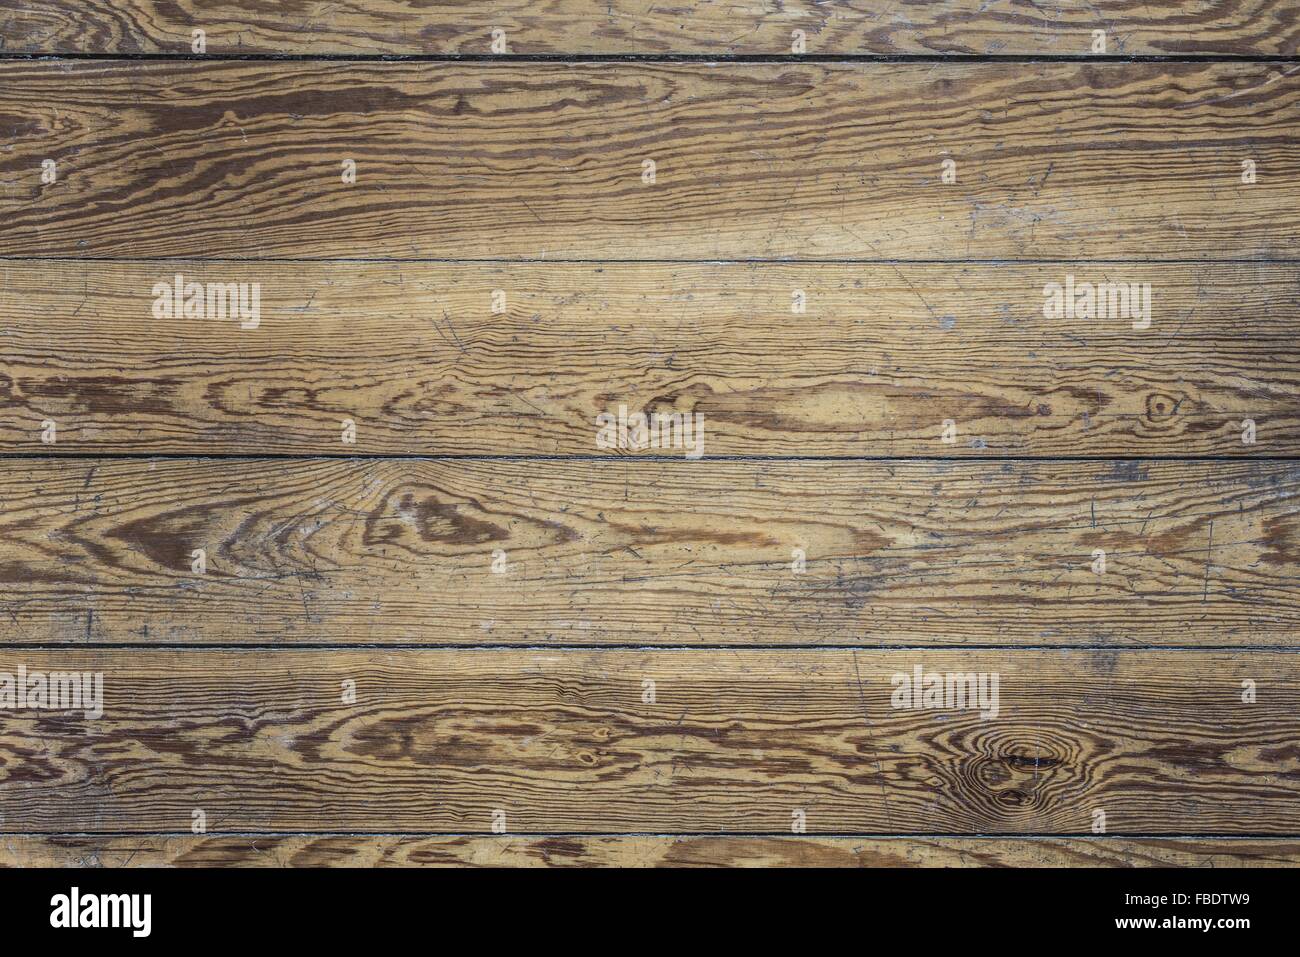 Close-Up Of Wooden Plank Stock Photo